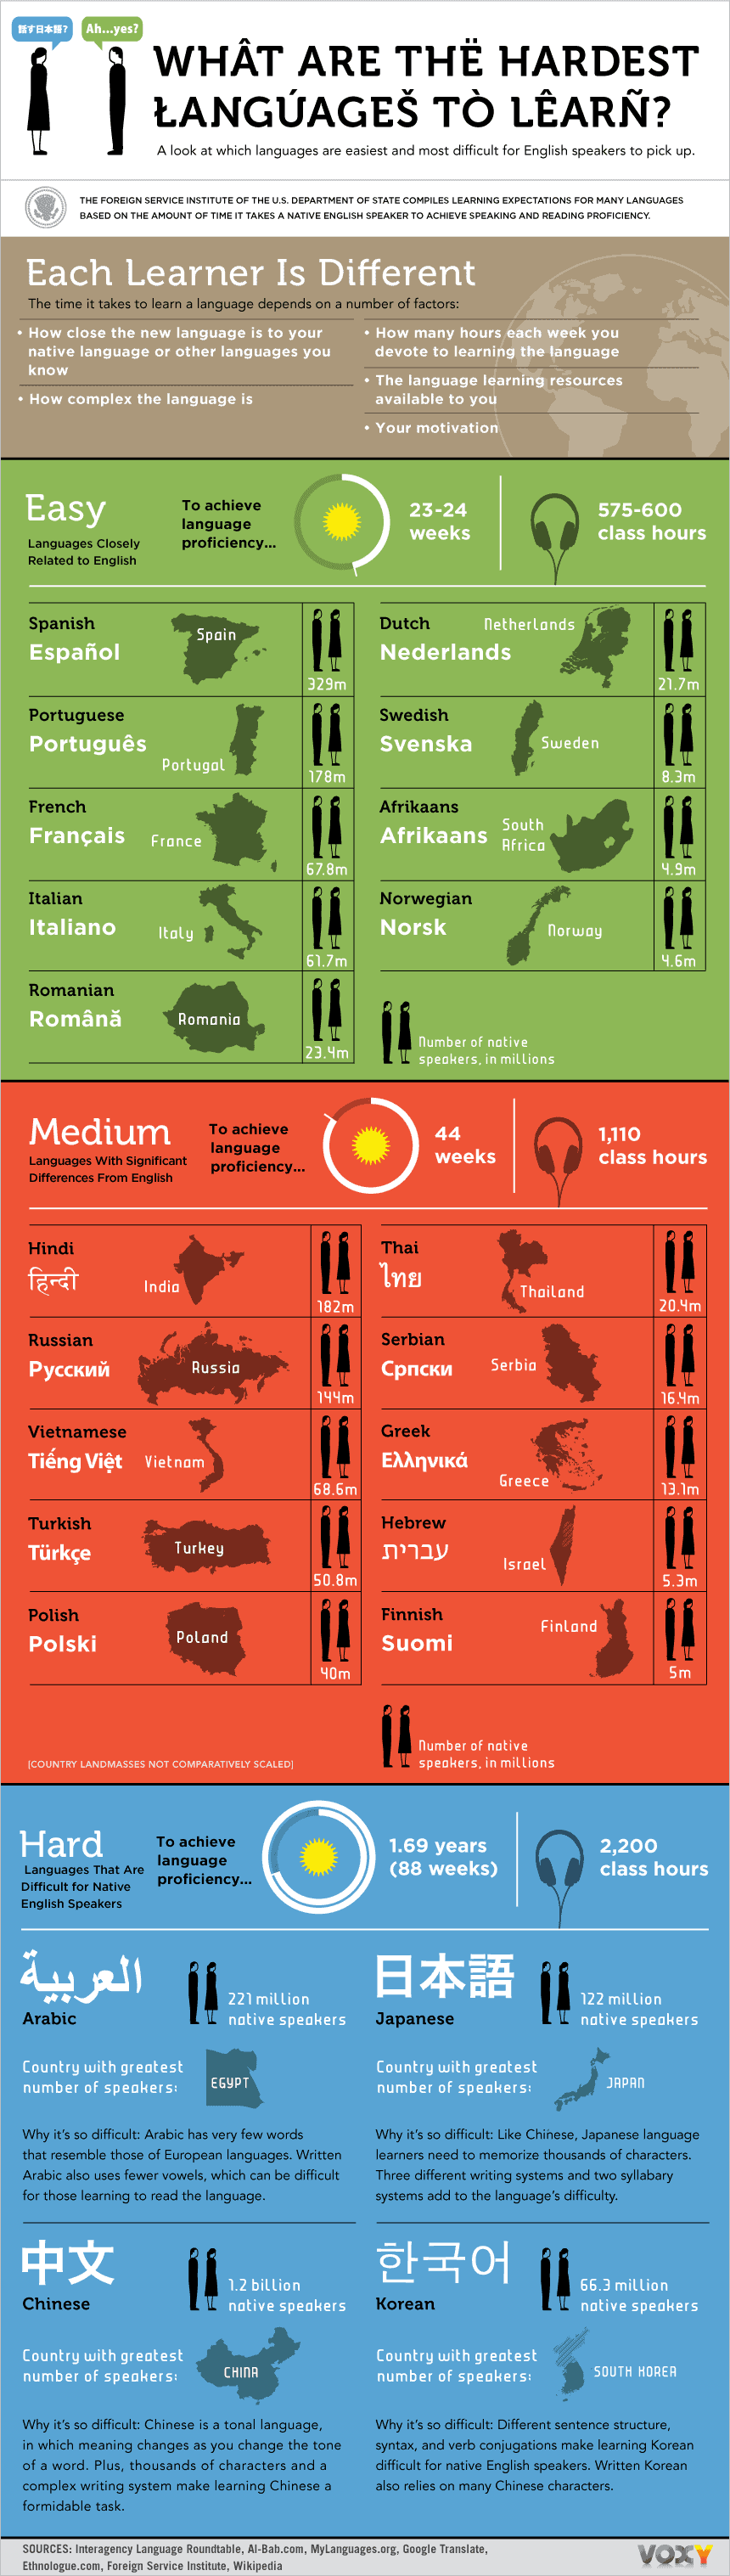 What Are The Hardest Languages to Learn? [Infographic] | Daily ...